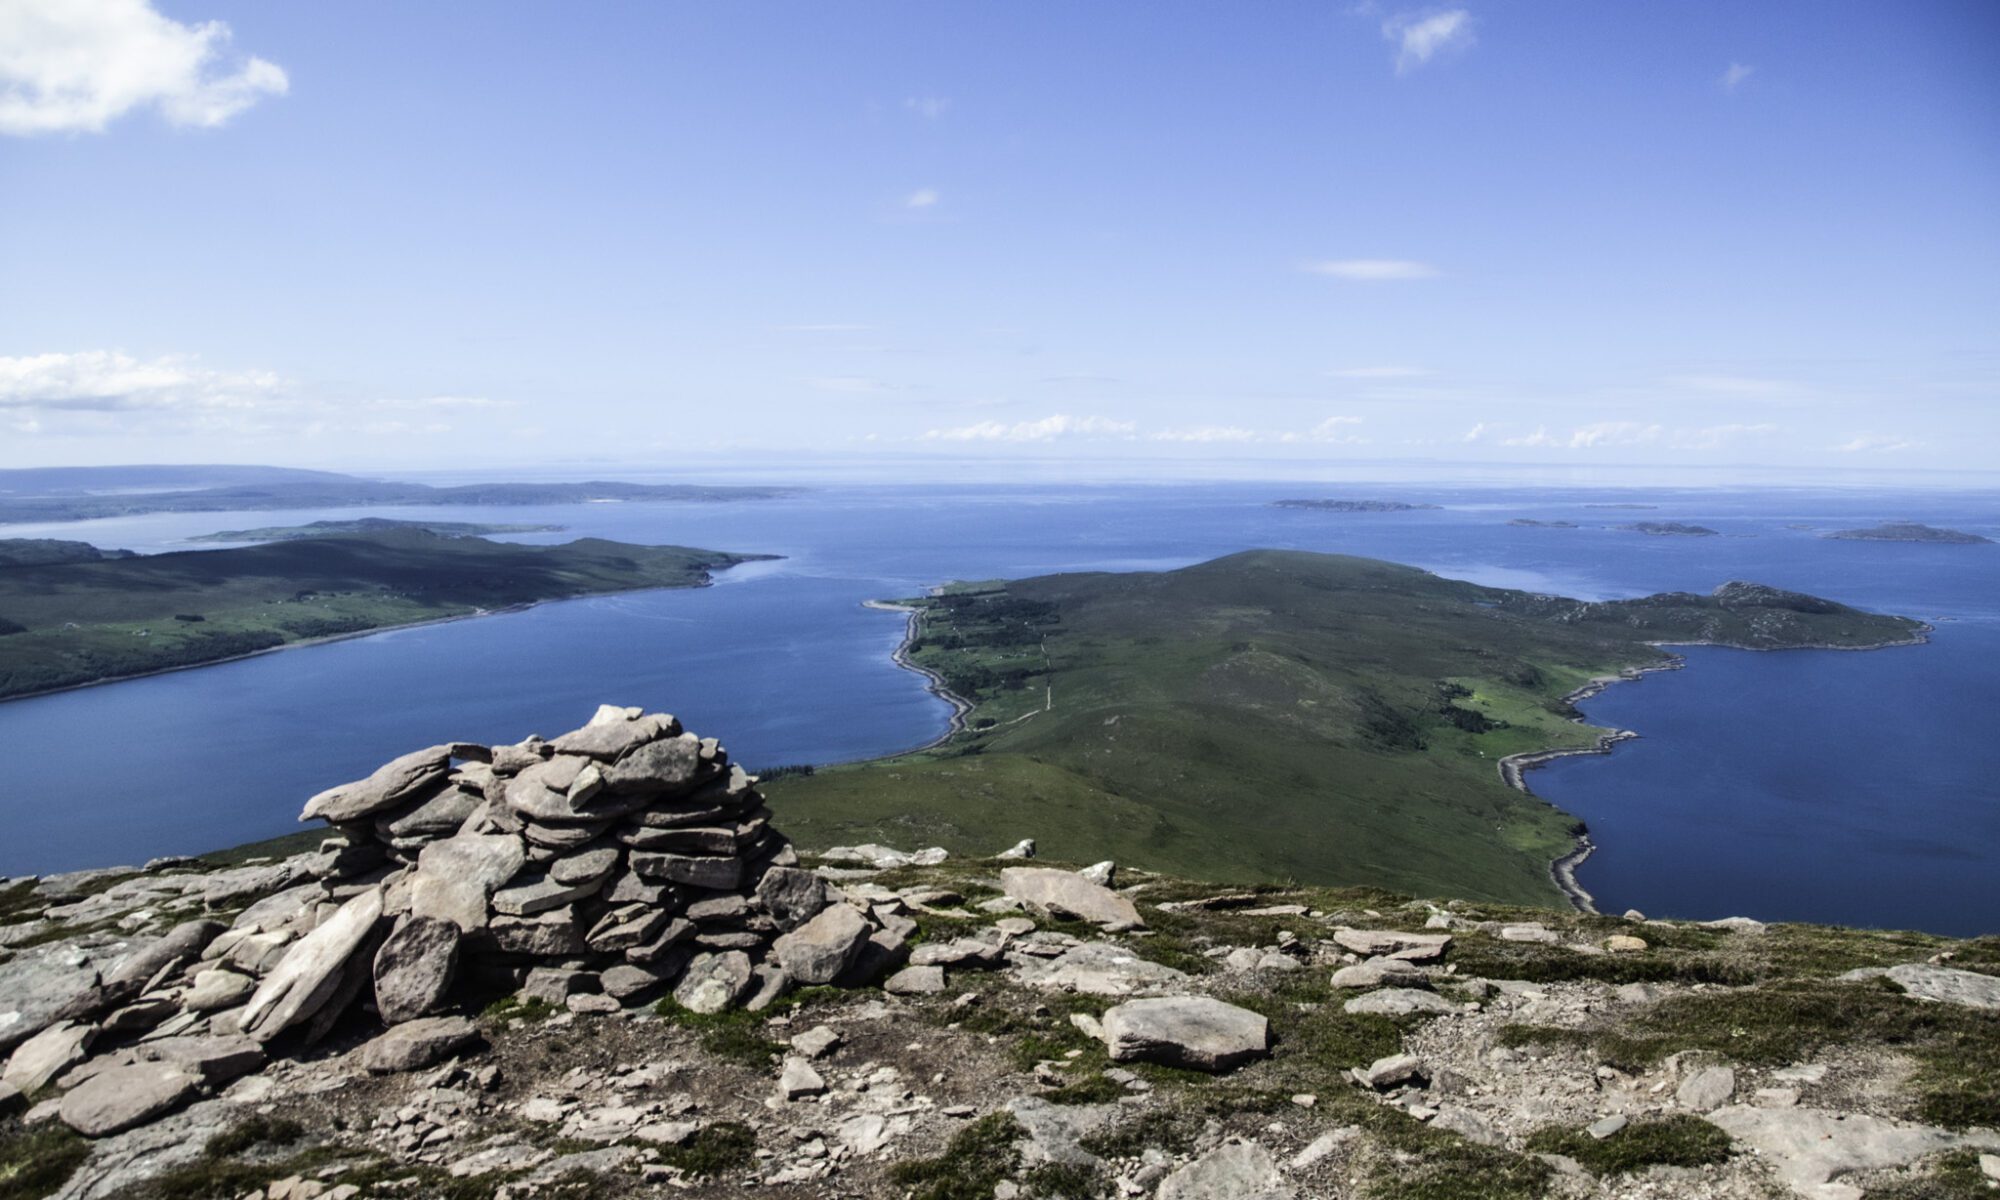 View from the top of Beinn Ghobhlach